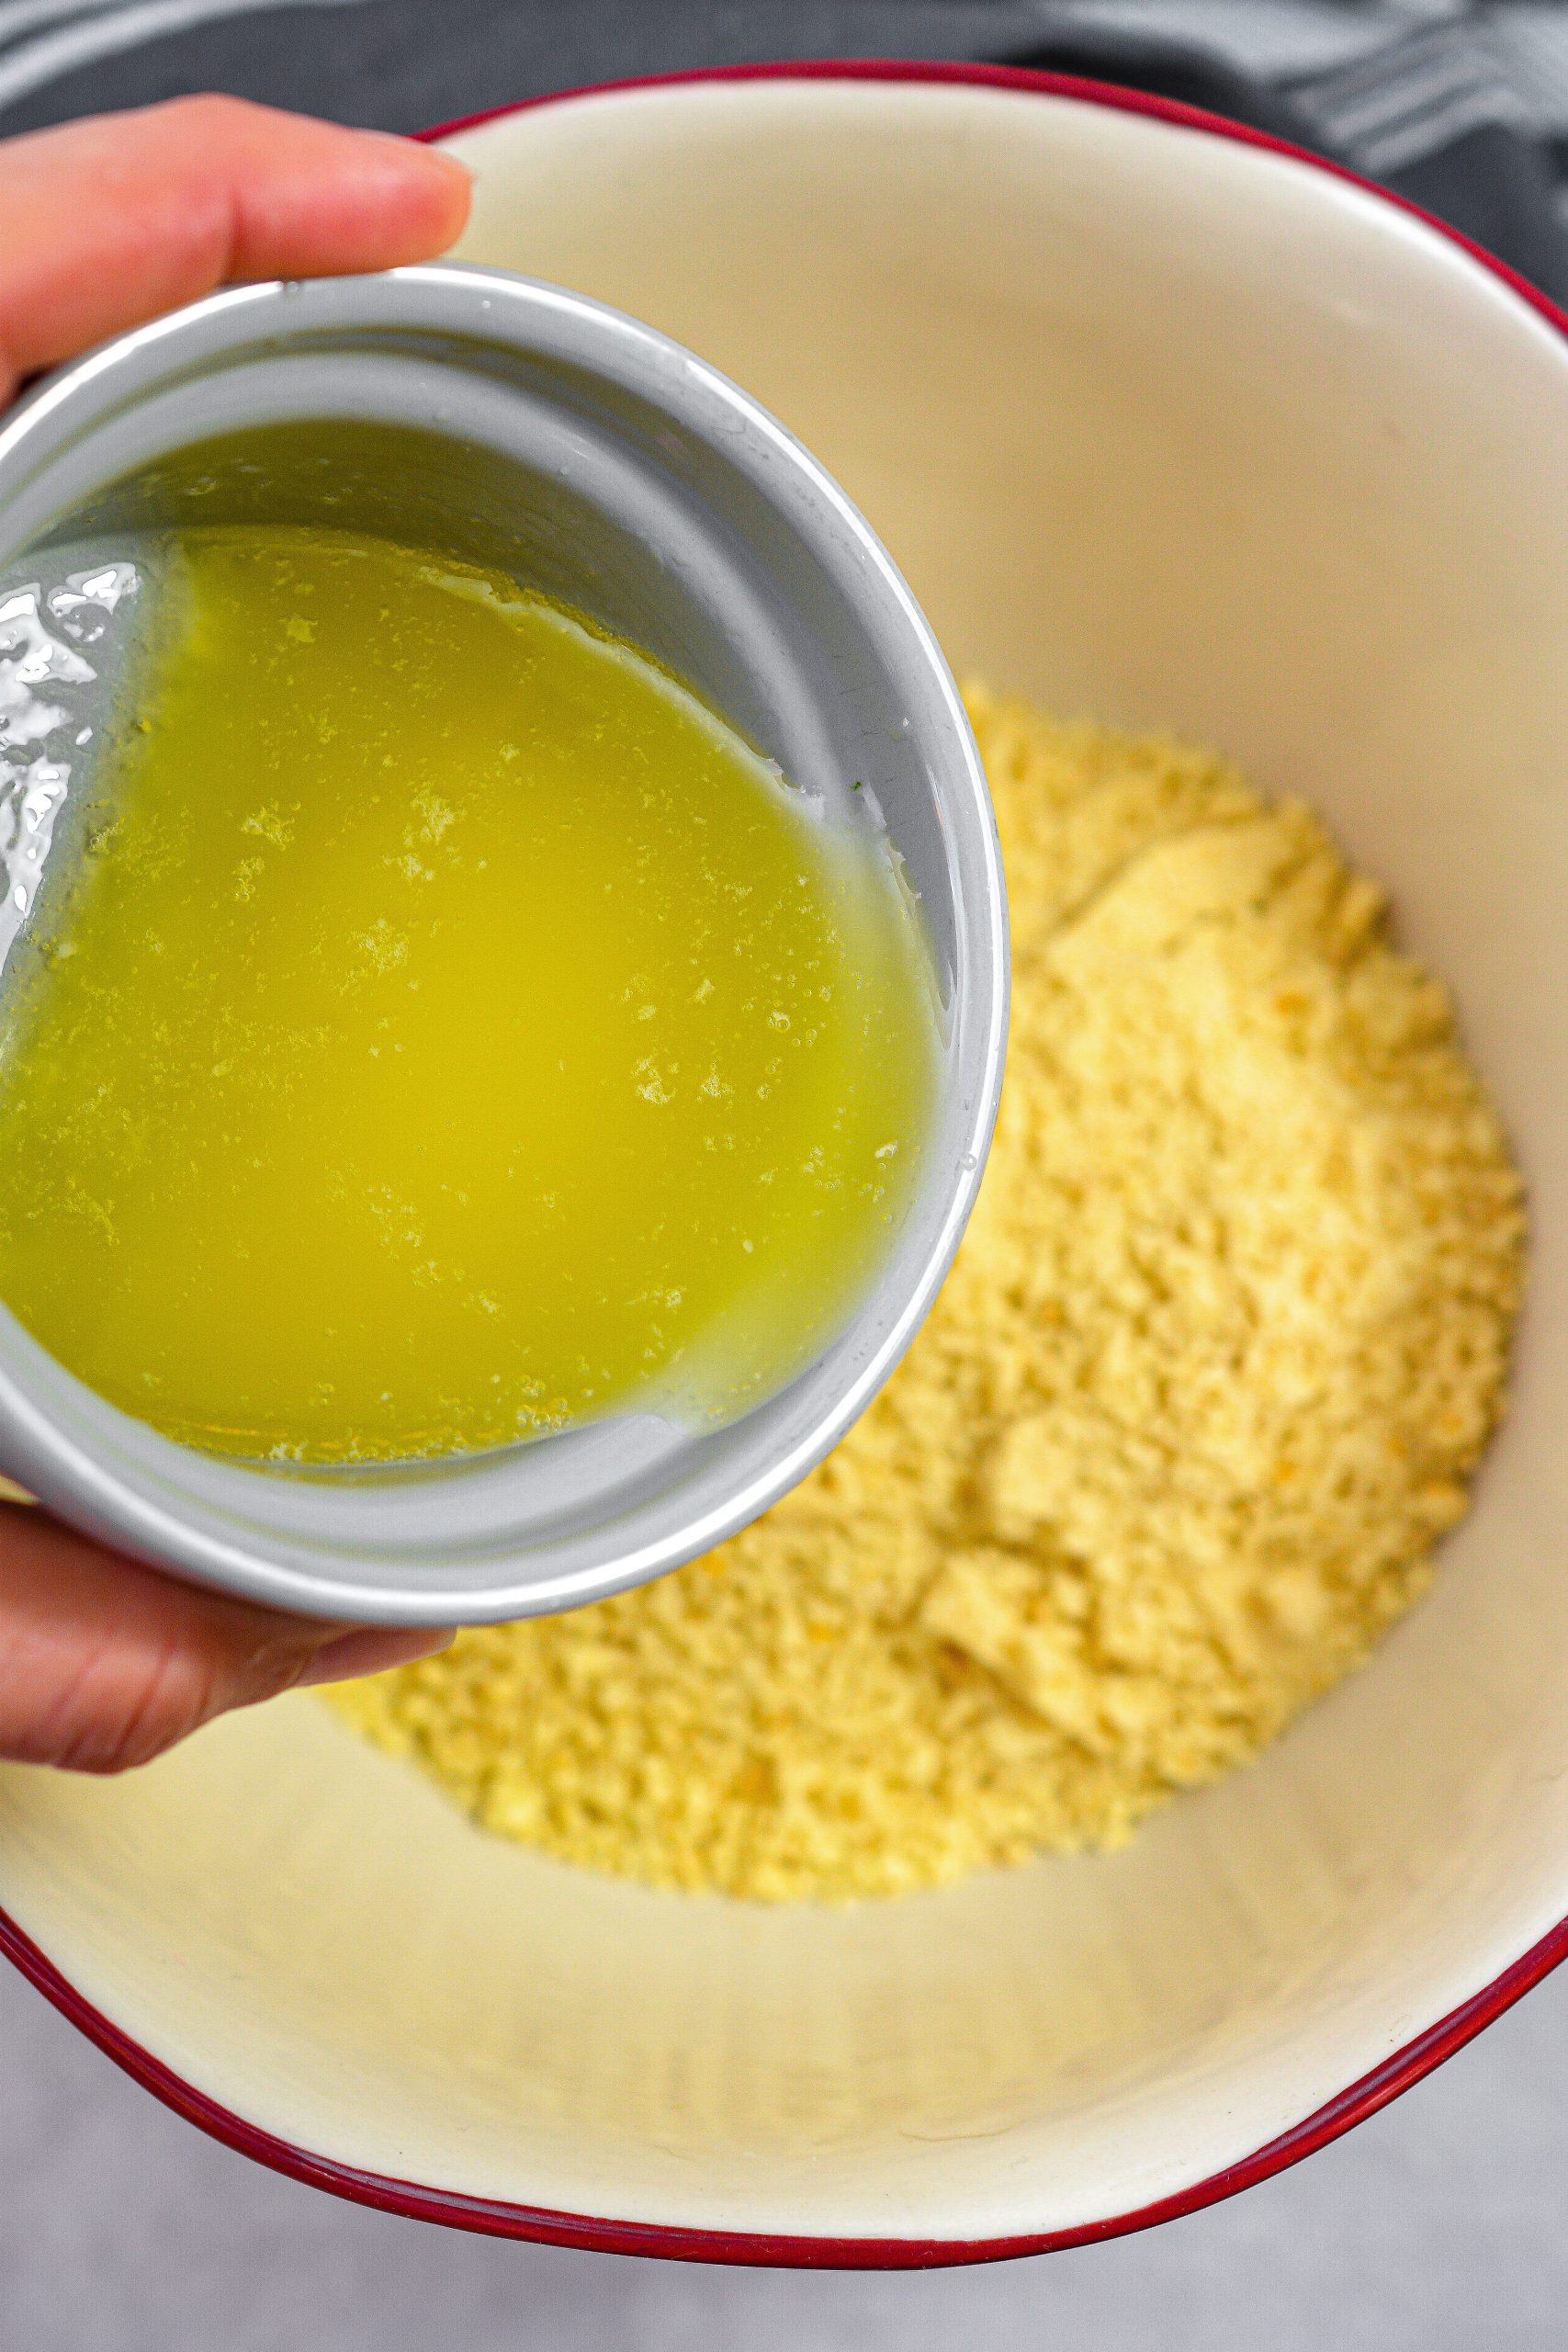 add the melted butter to a bowl and stir to combine well.